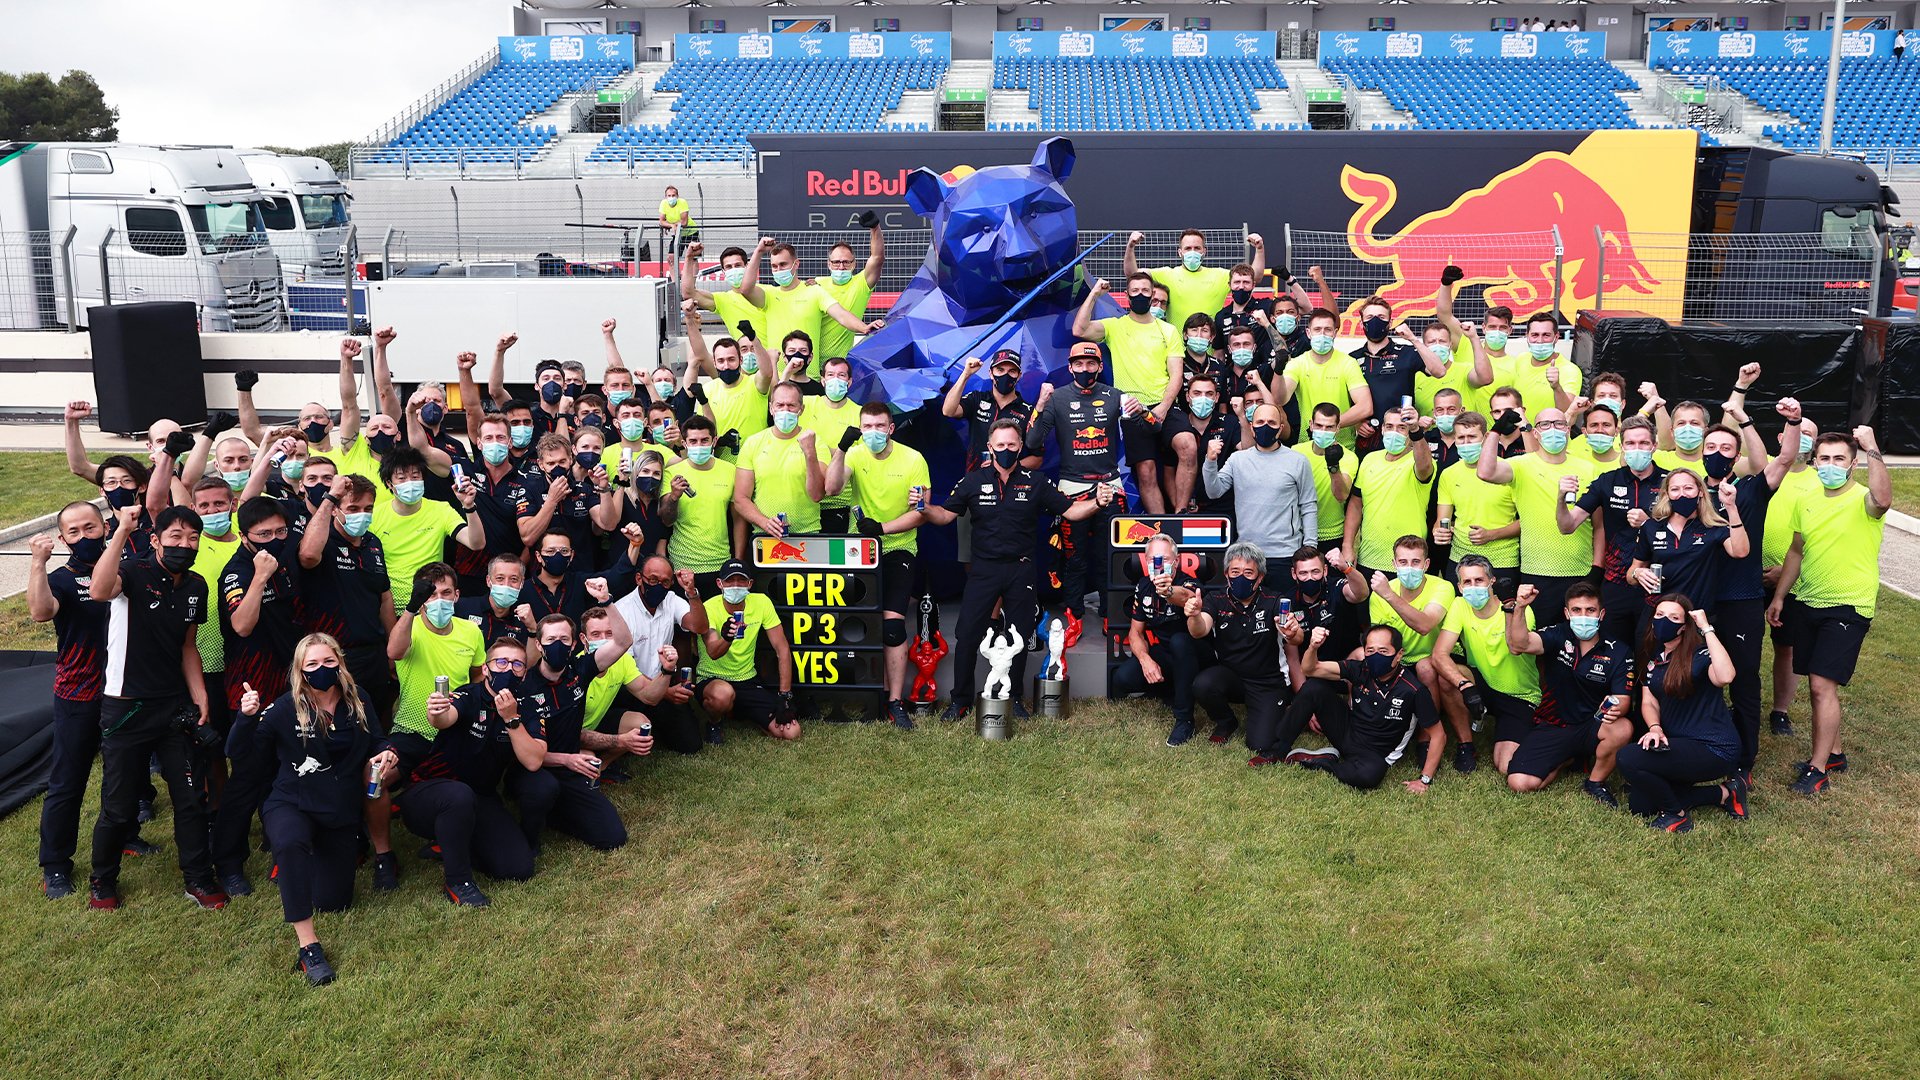 Red Bull dominates French GP and takes home third consecutive win